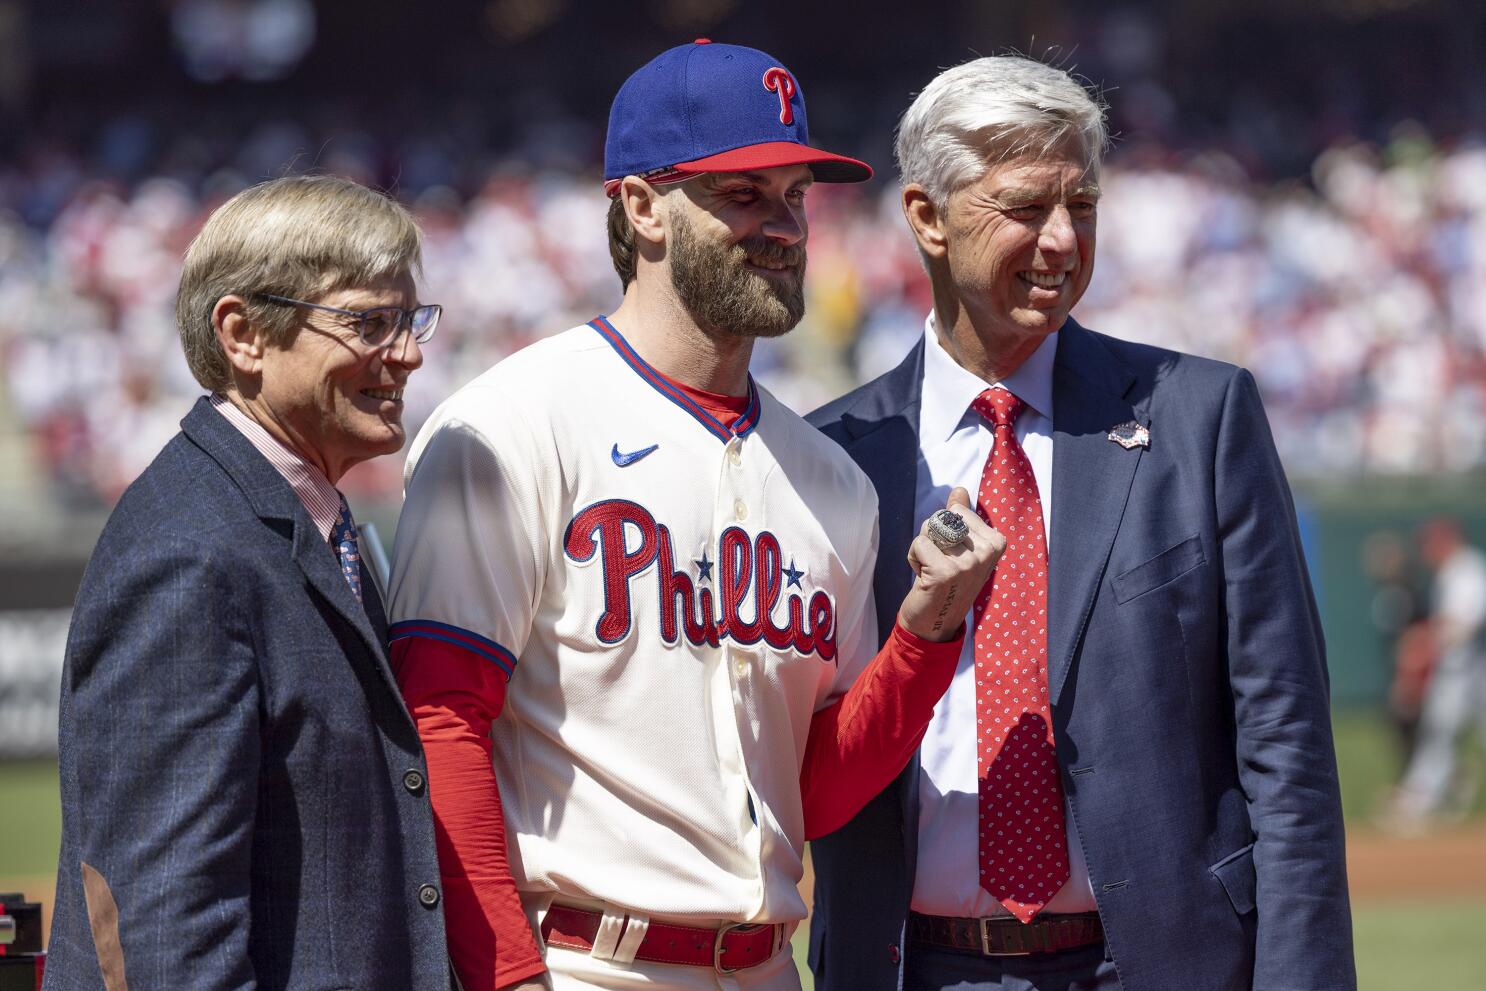 Bryce Harper 'ahead' of schedule in recovery from Tommy John